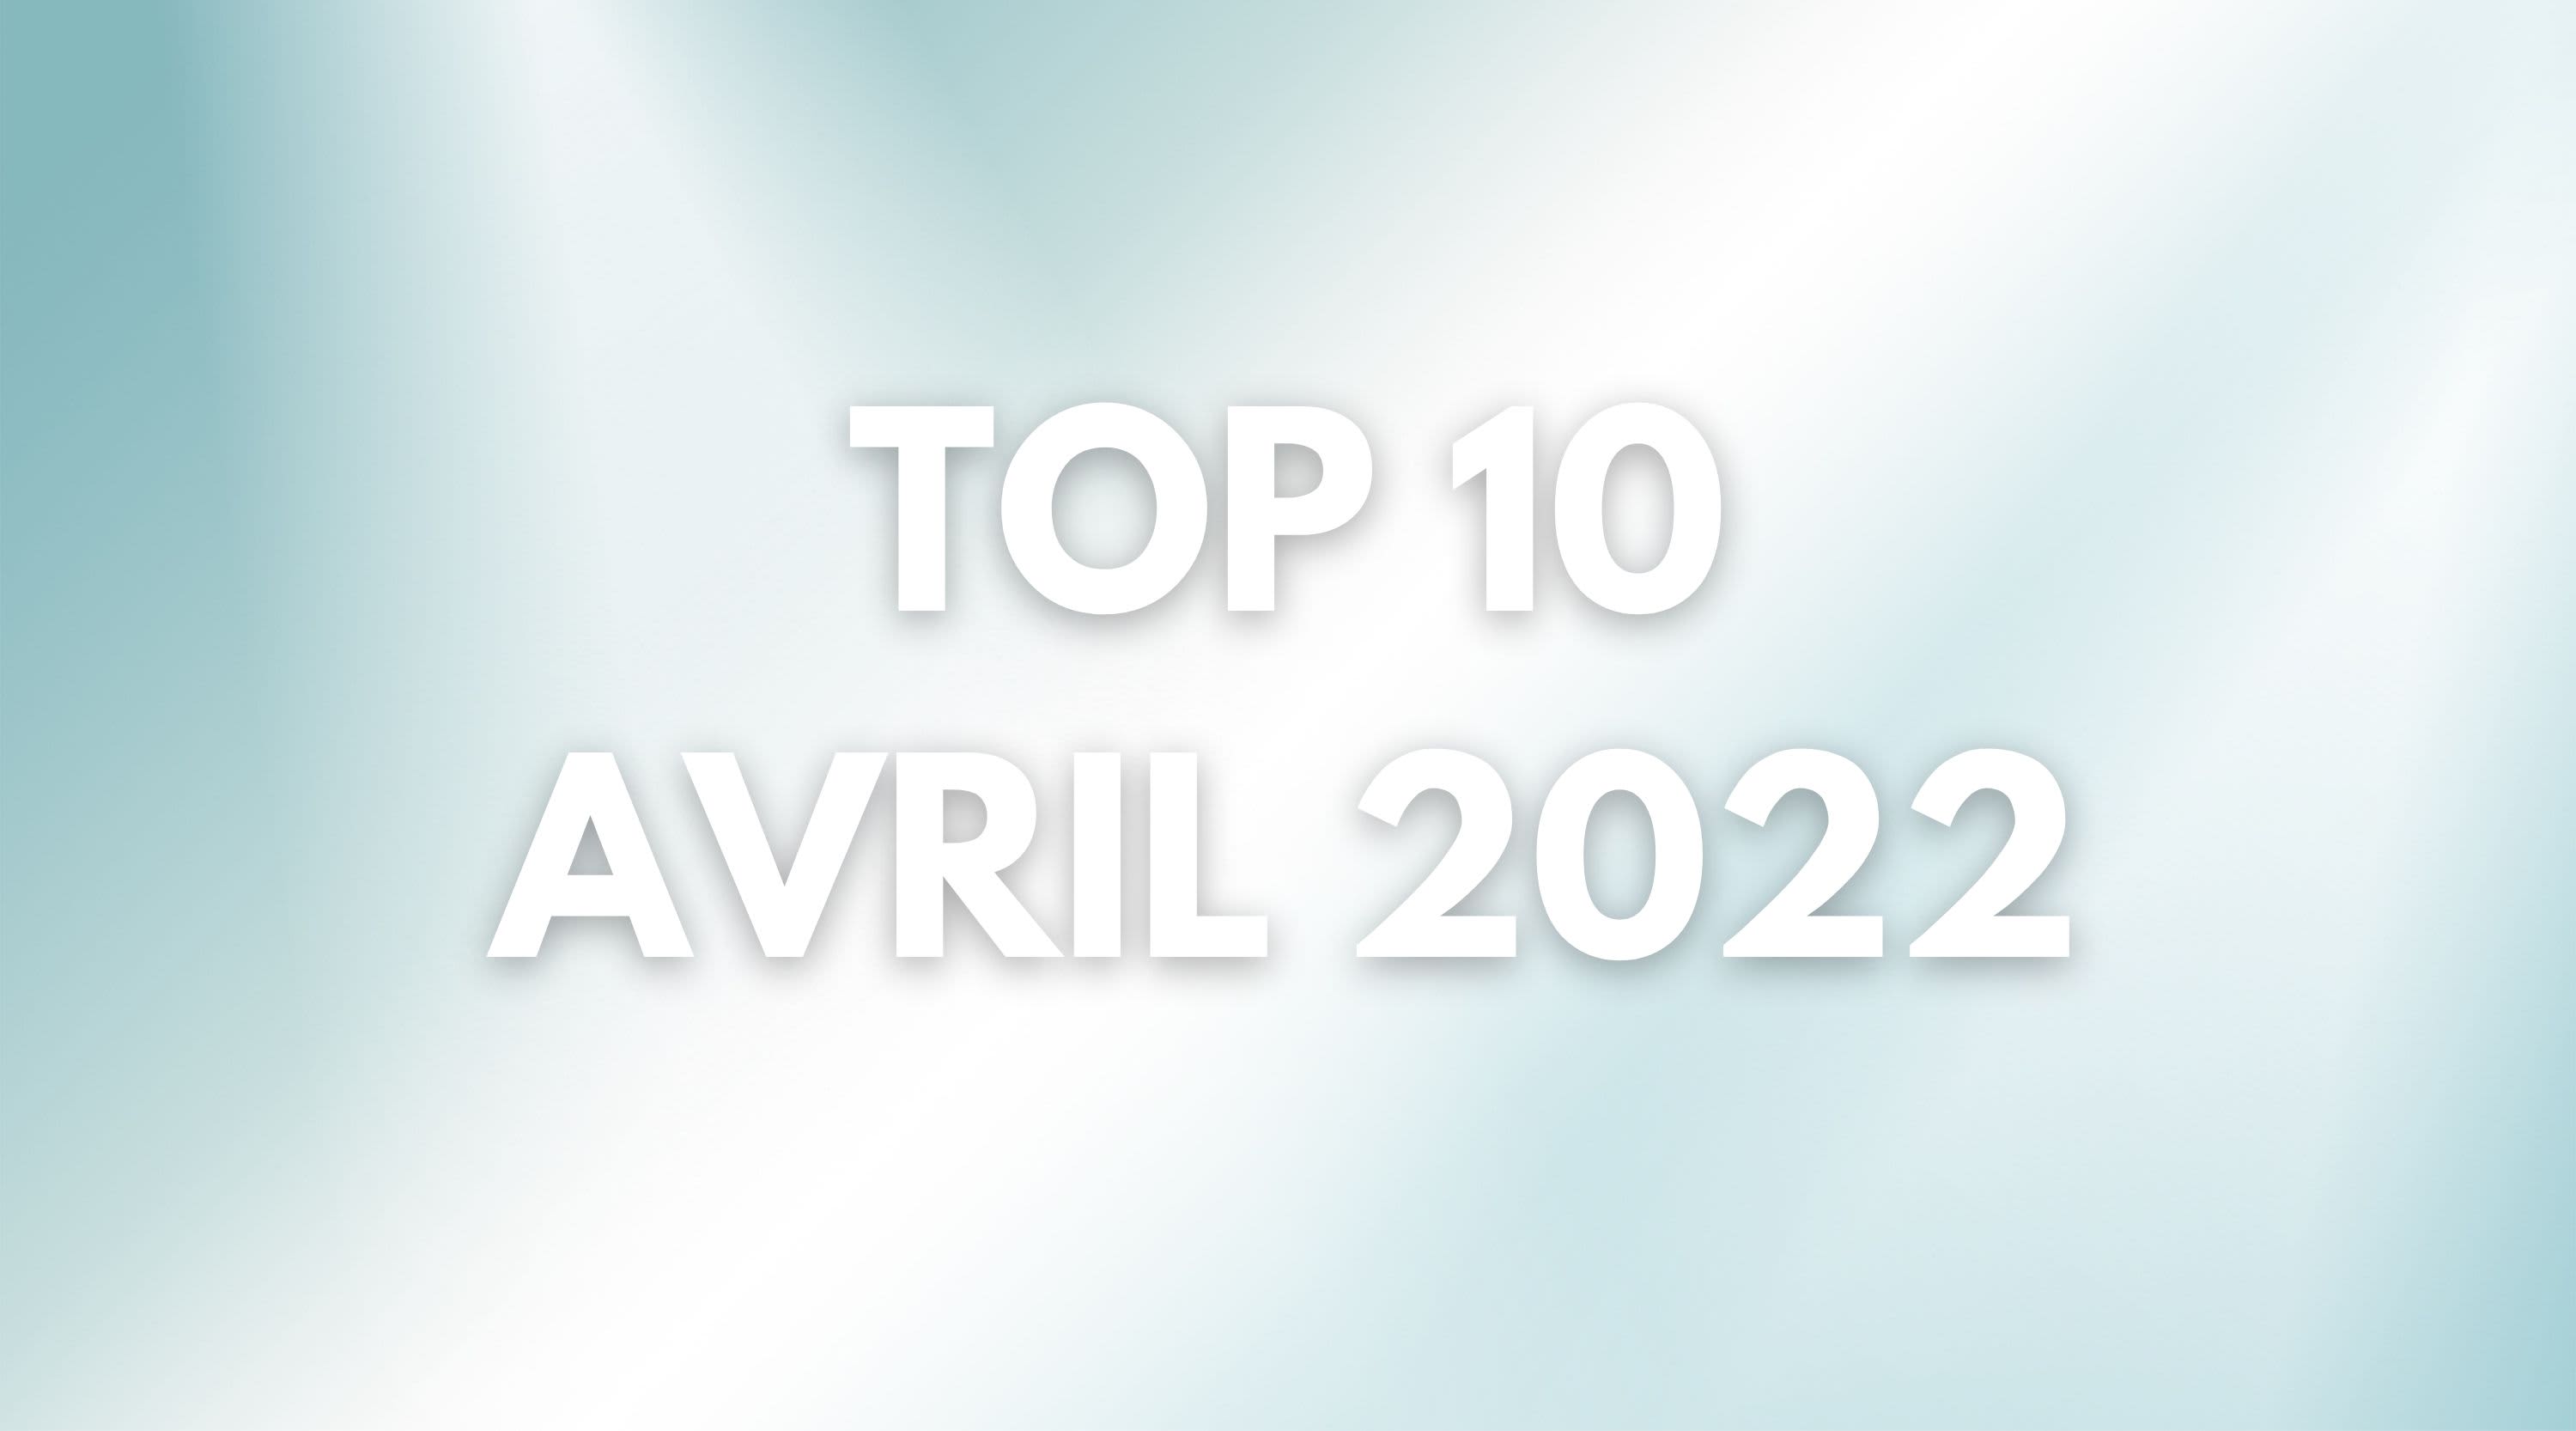 Top 10 avril 2022